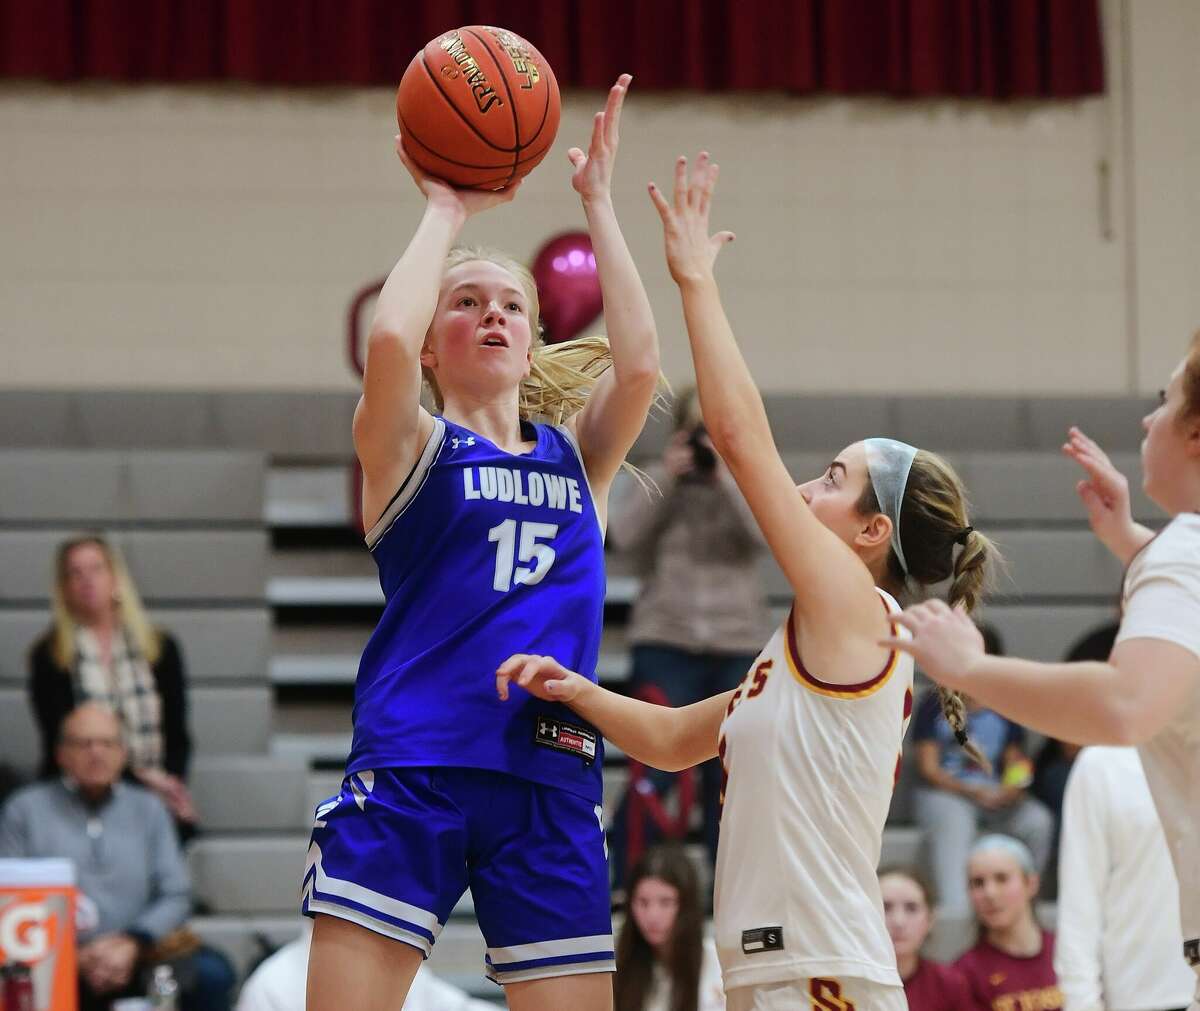 Fairfield Ludlowe's Phoebe Shostak, seen shooting over St. Joseph defender Gigi Gracia earlier this season, has stepped up for the Falcons in the CIAC Class LL tournament.